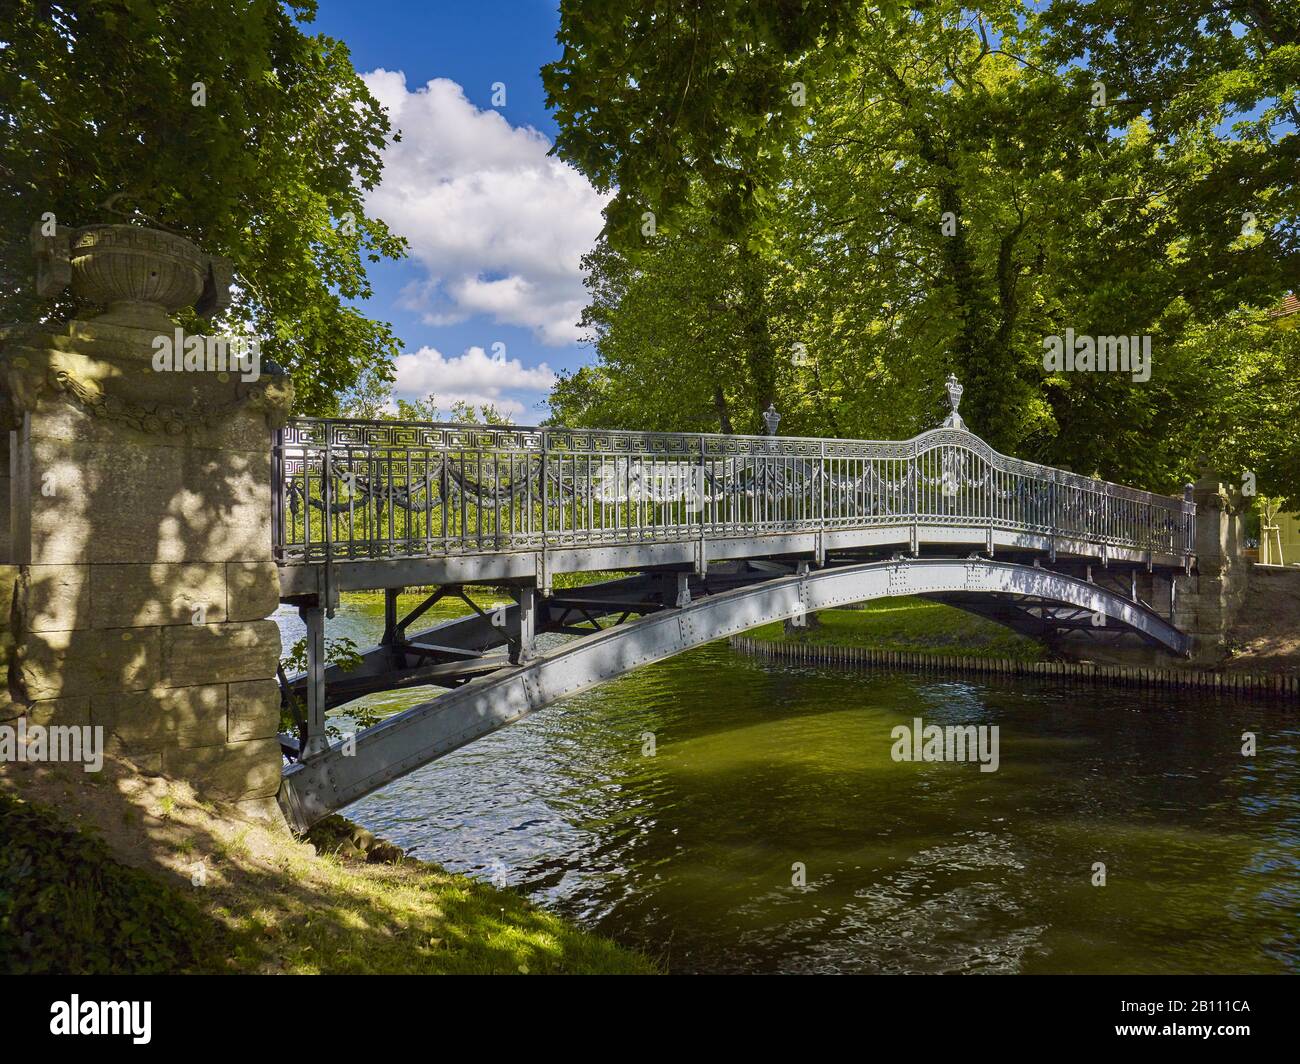 Bridge from the castle island Mirow to the love island in the Mirower lake, Mirow, Mecklenburg-Vorpommern, Germany Stock Photo